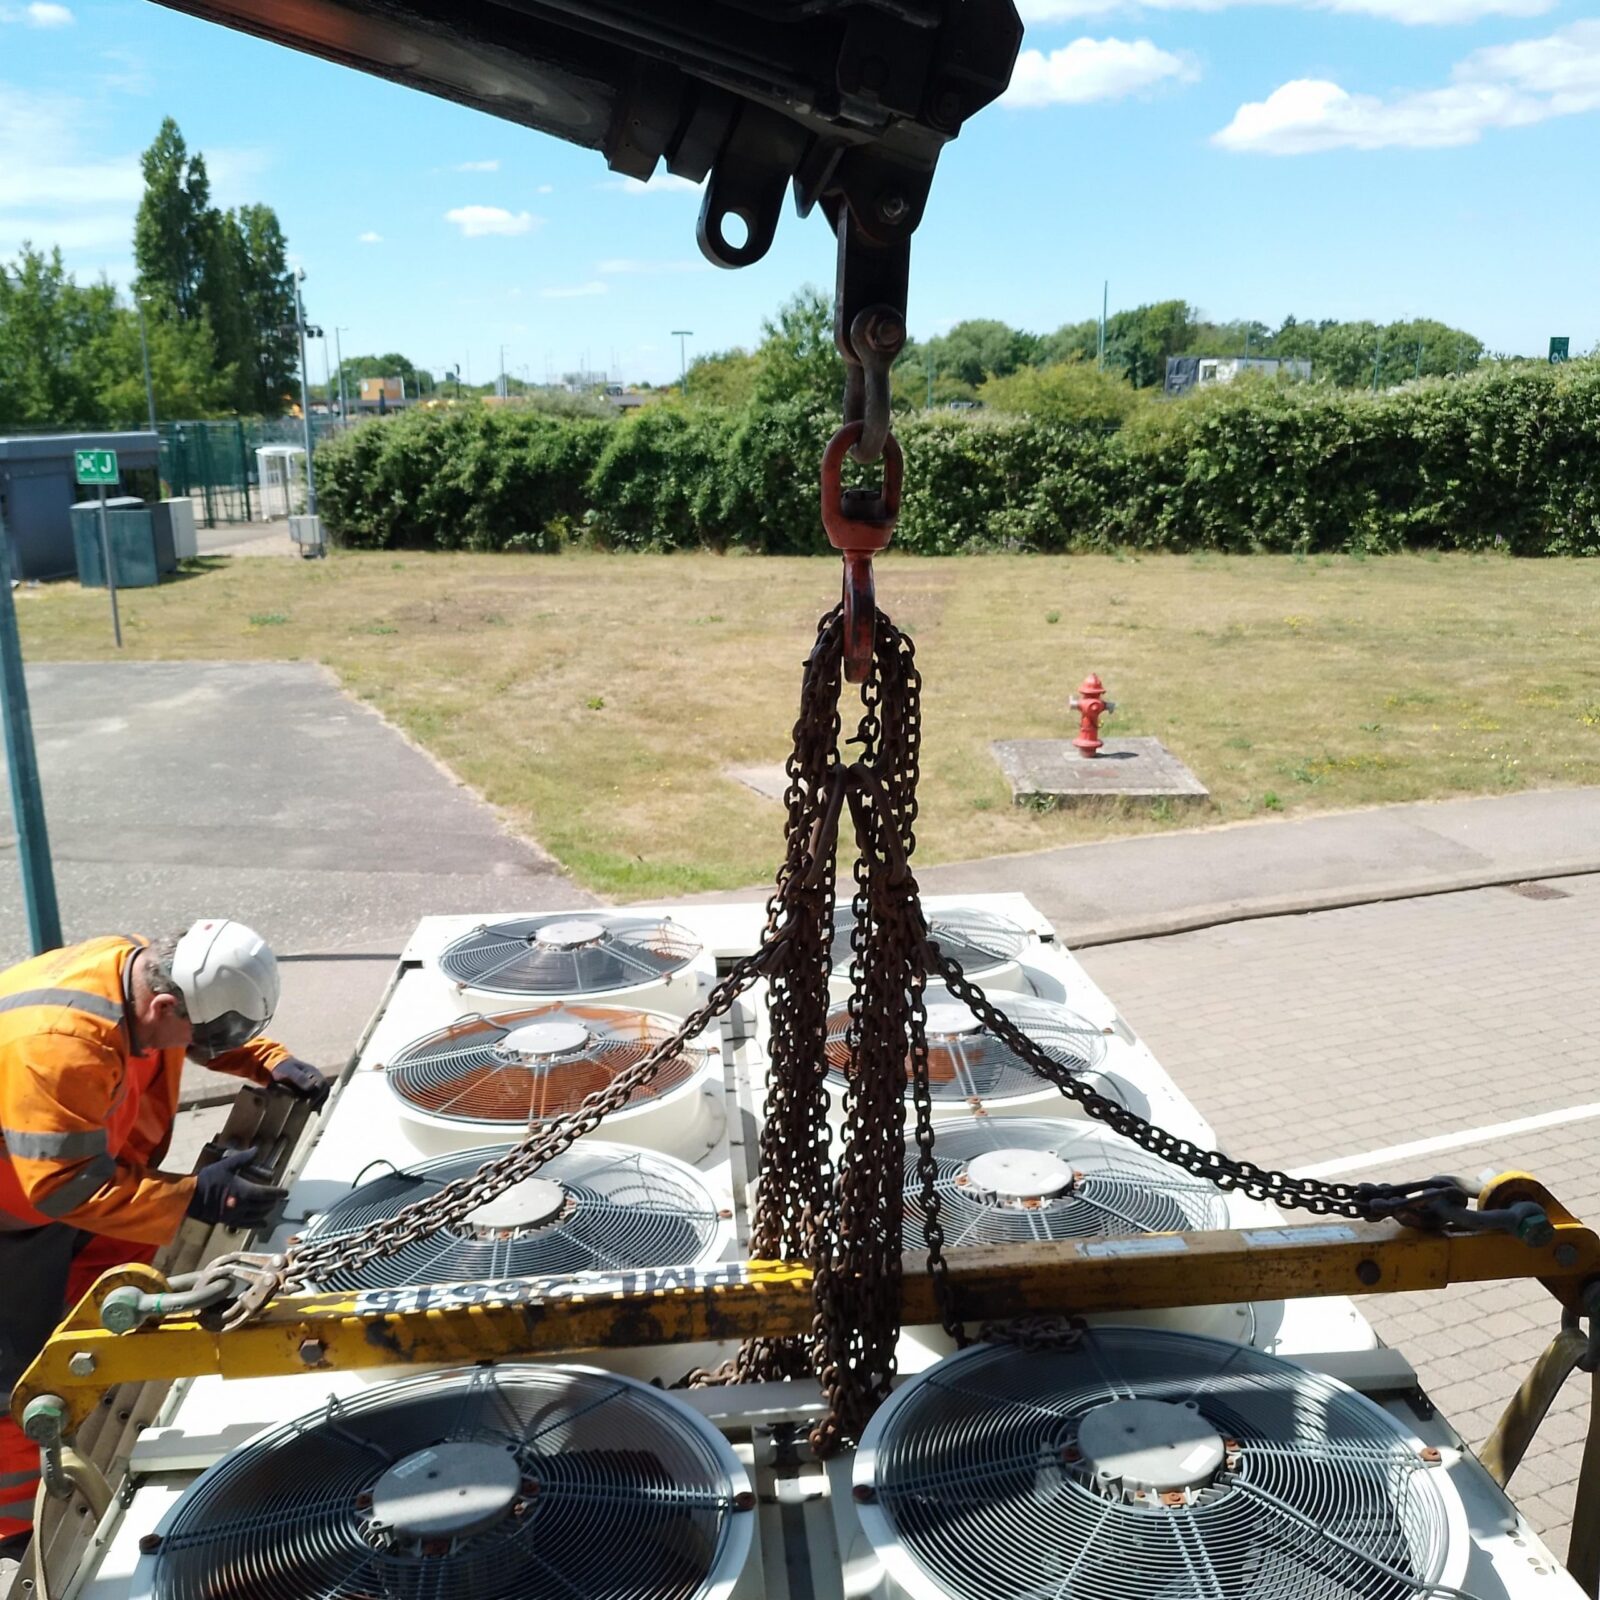 Temporary chiller hire being delivered to a Kent Pharmaceutical site. A spreader bar is used.